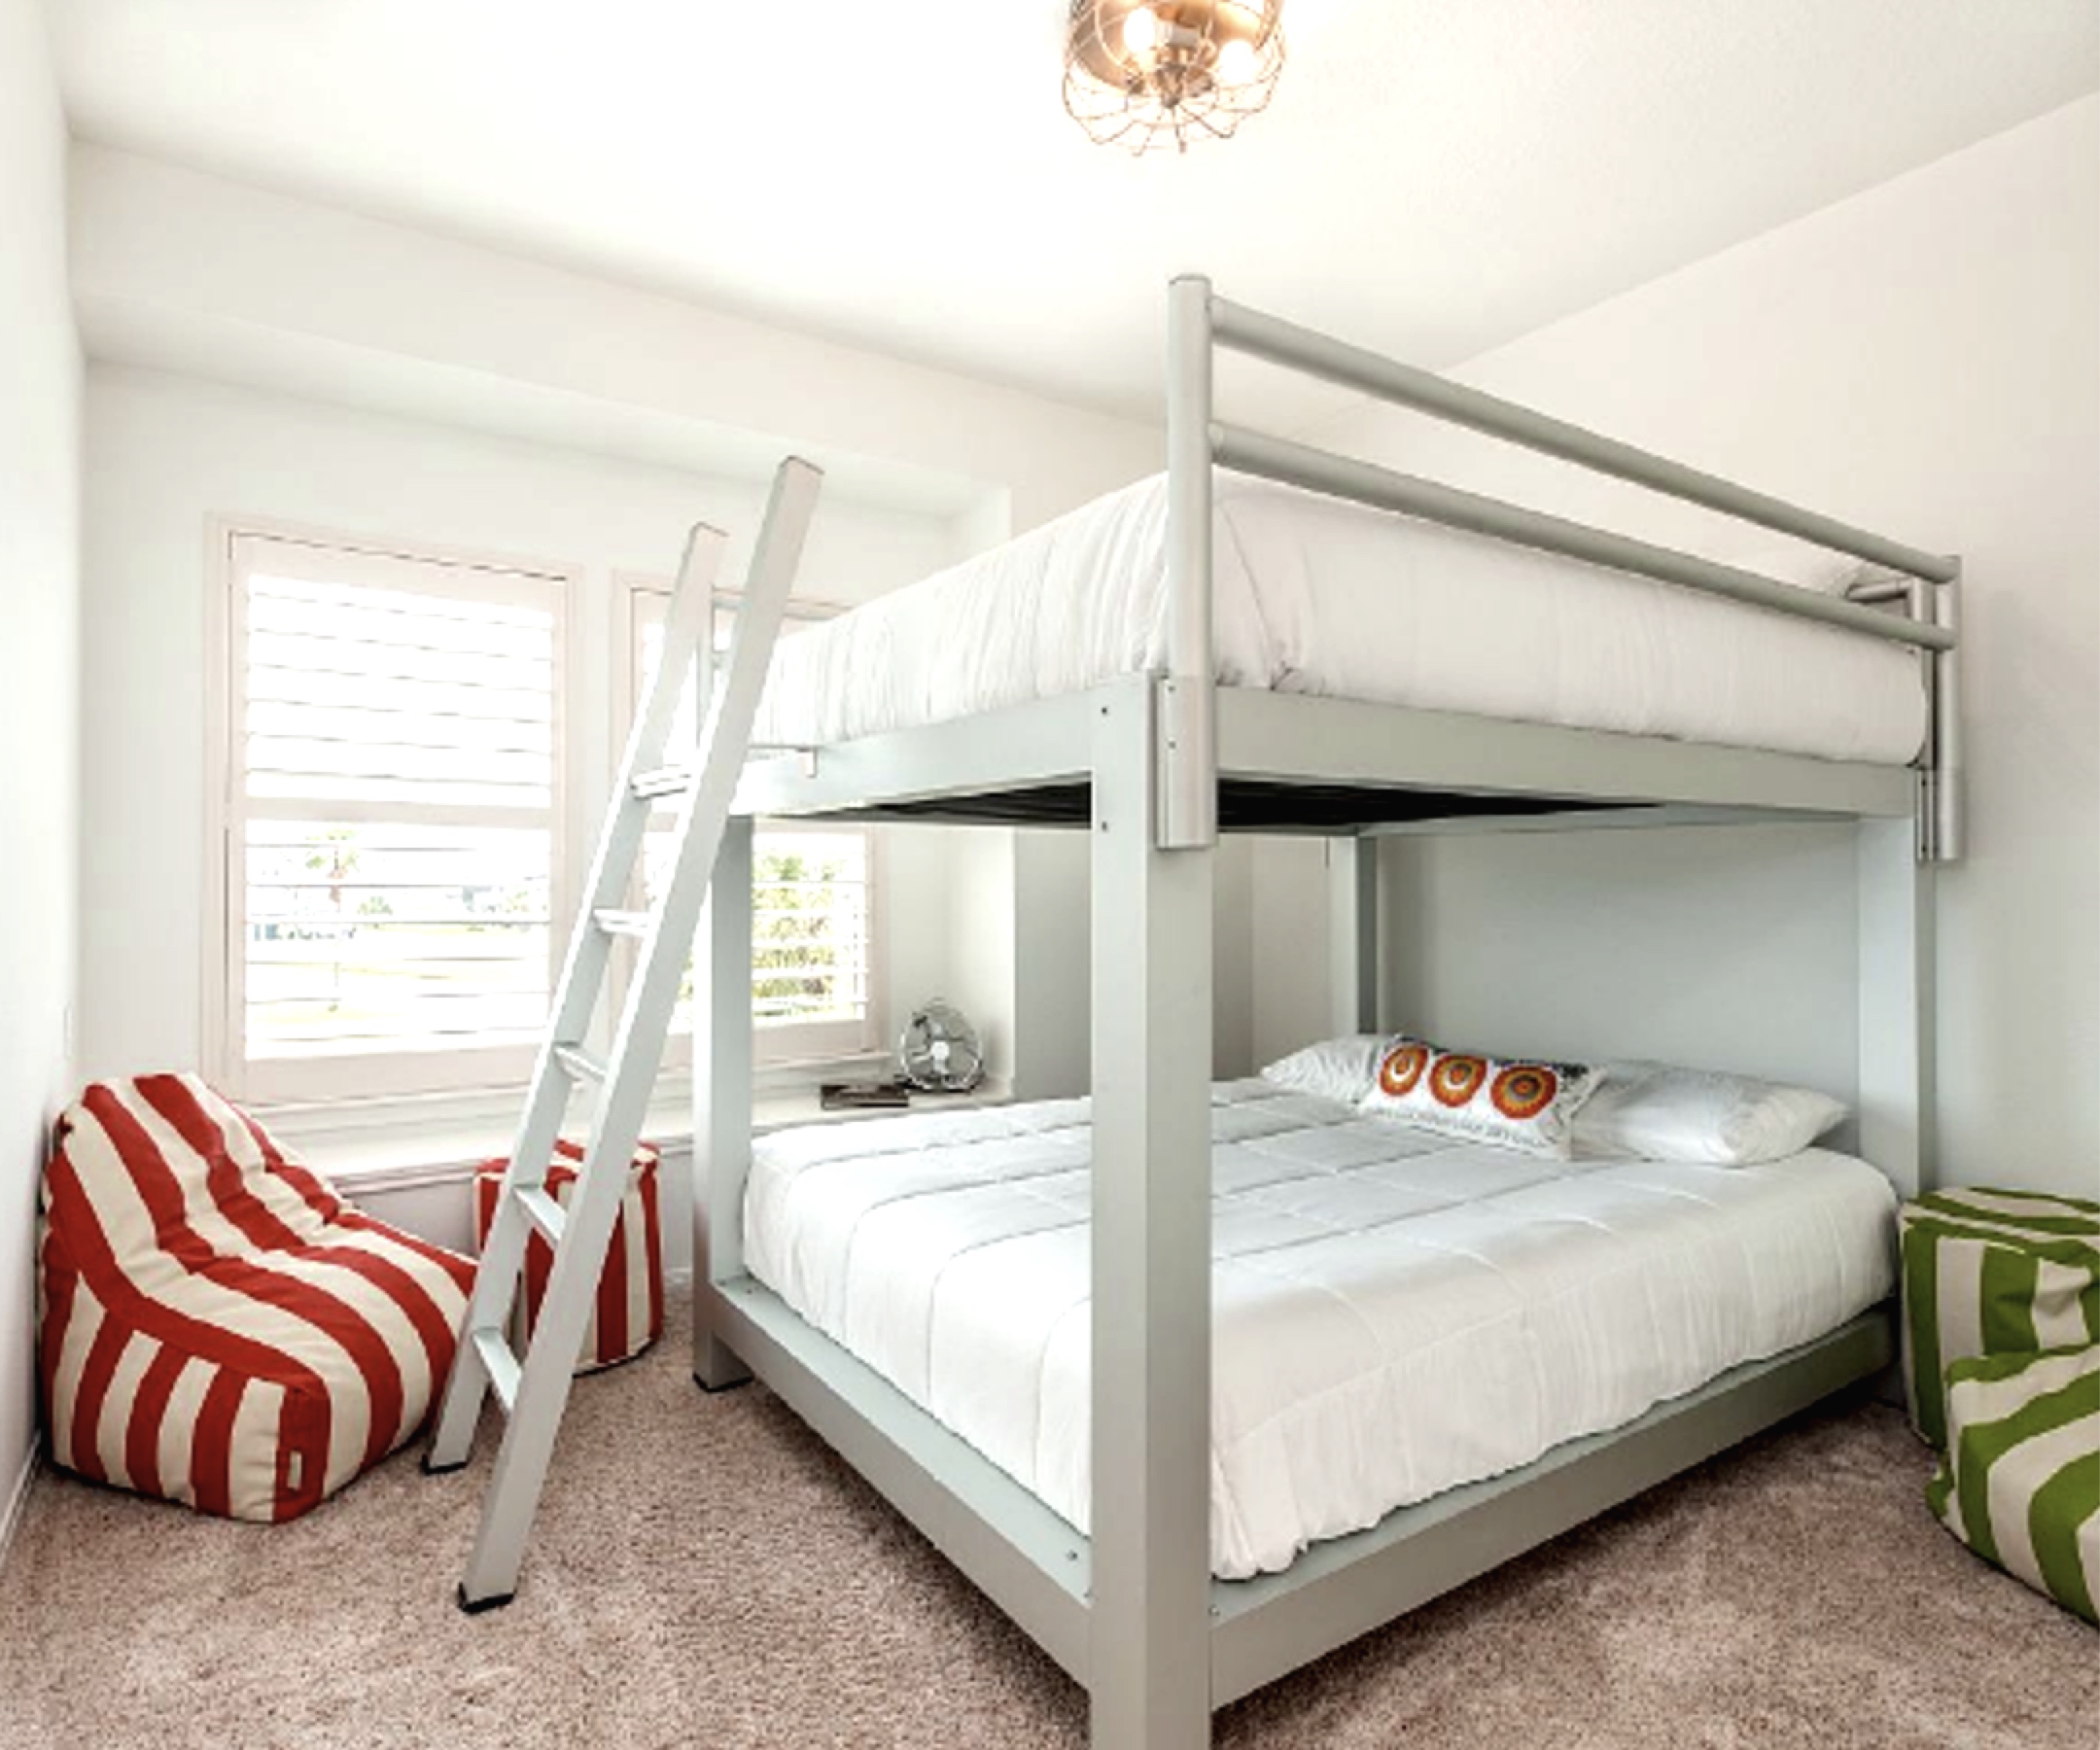 Bunk Bed Ideas For A Small Space, Queen Size Bunk Beds Diy